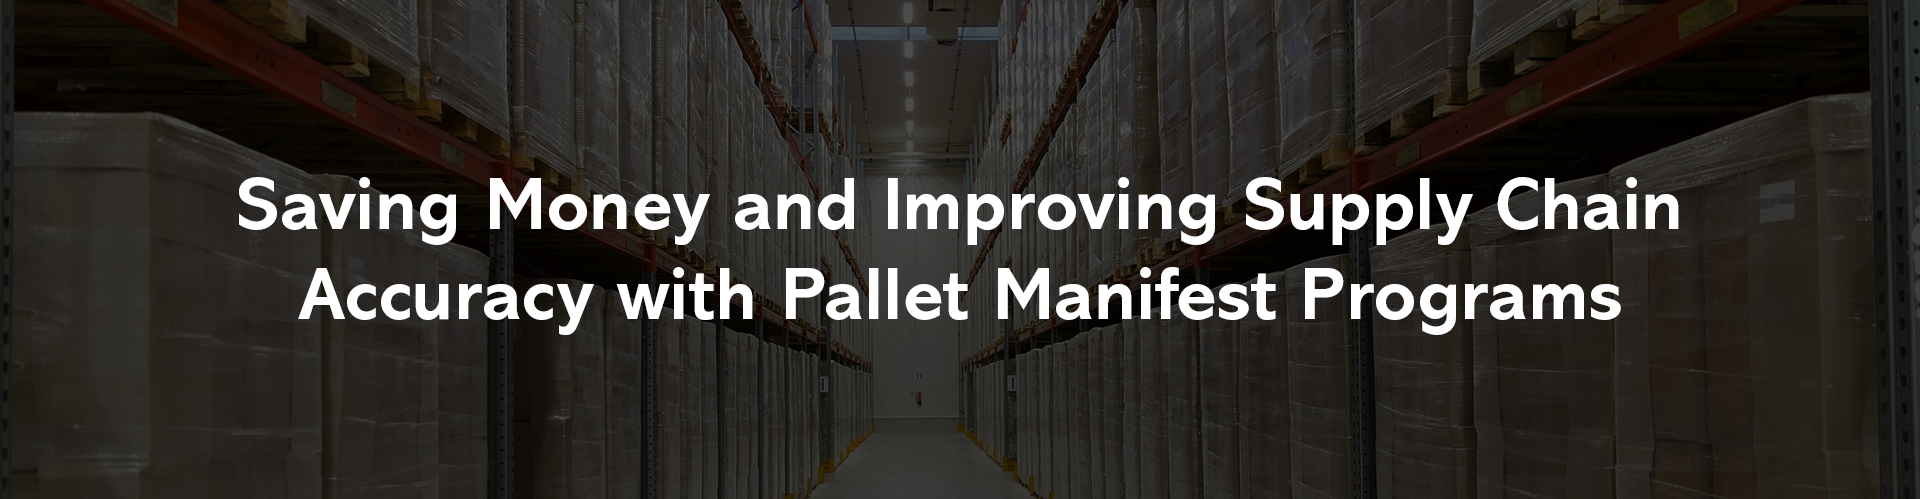 Saving Money and Improving Supply Chain Accuracy with Pallet Manifest Programs